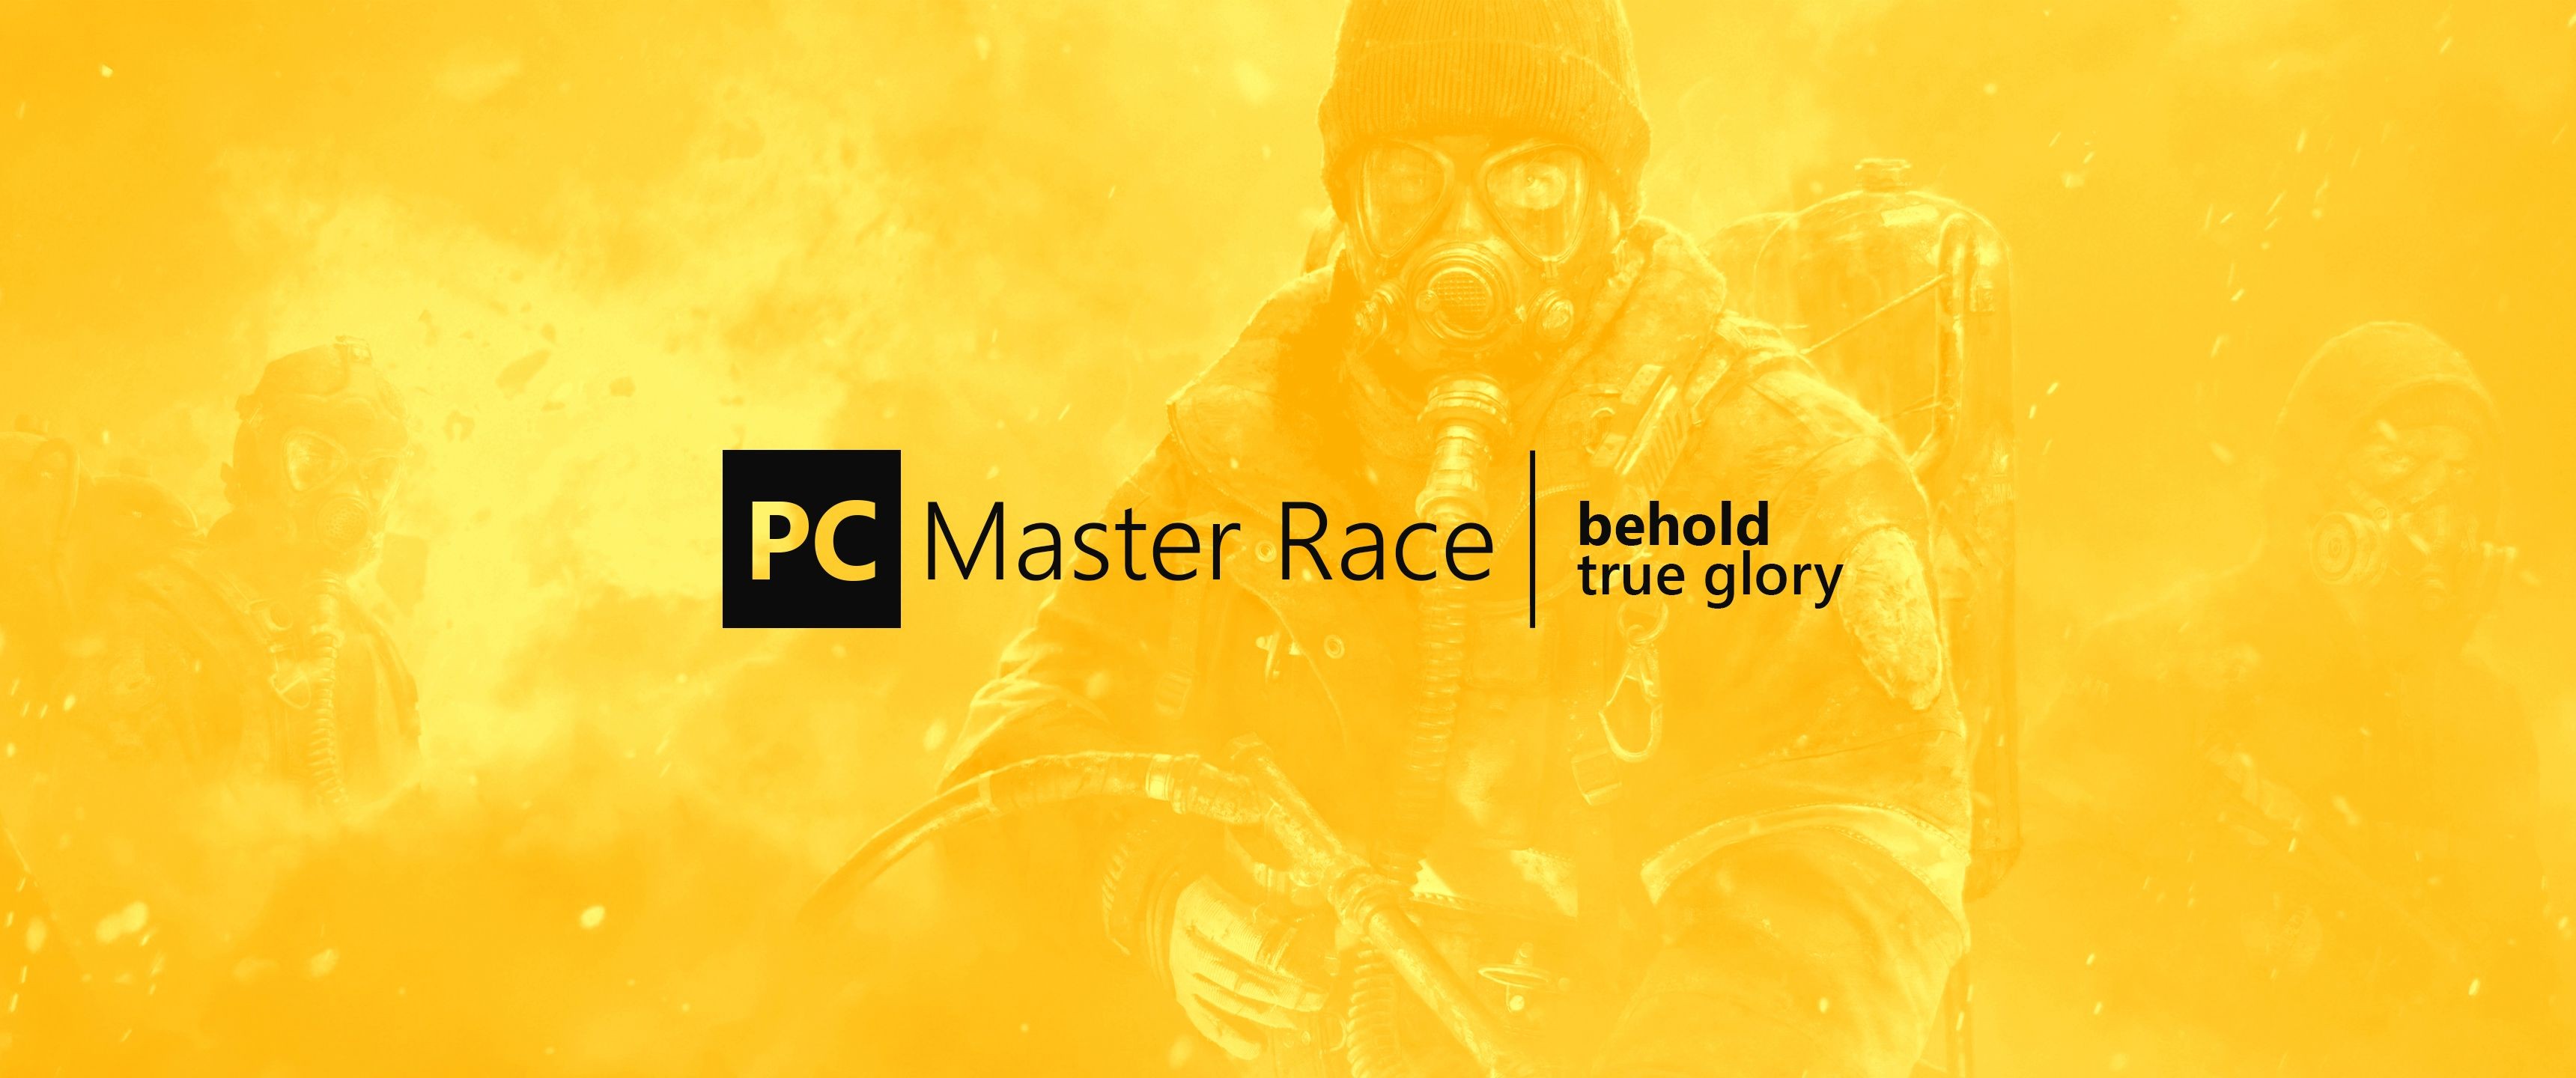 PC Master Race PC Gaming Yellow Background 3440x1440